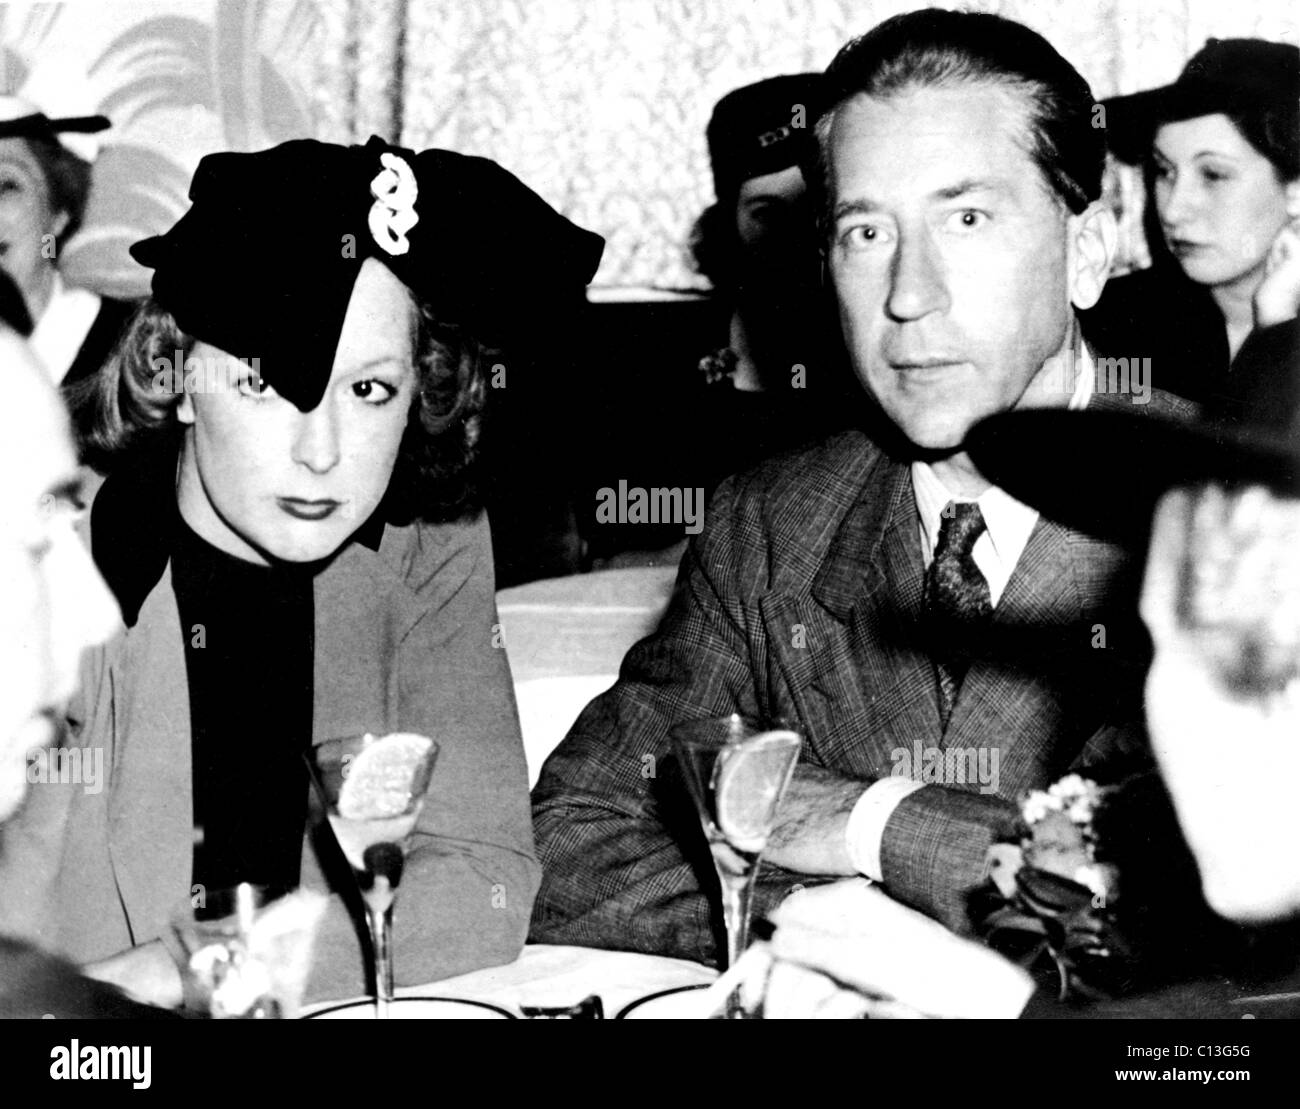 J. Paul Getty, oil millionaire, and wife, Louise Dudley, socialite singer, 11/16/1939 Stock Photo